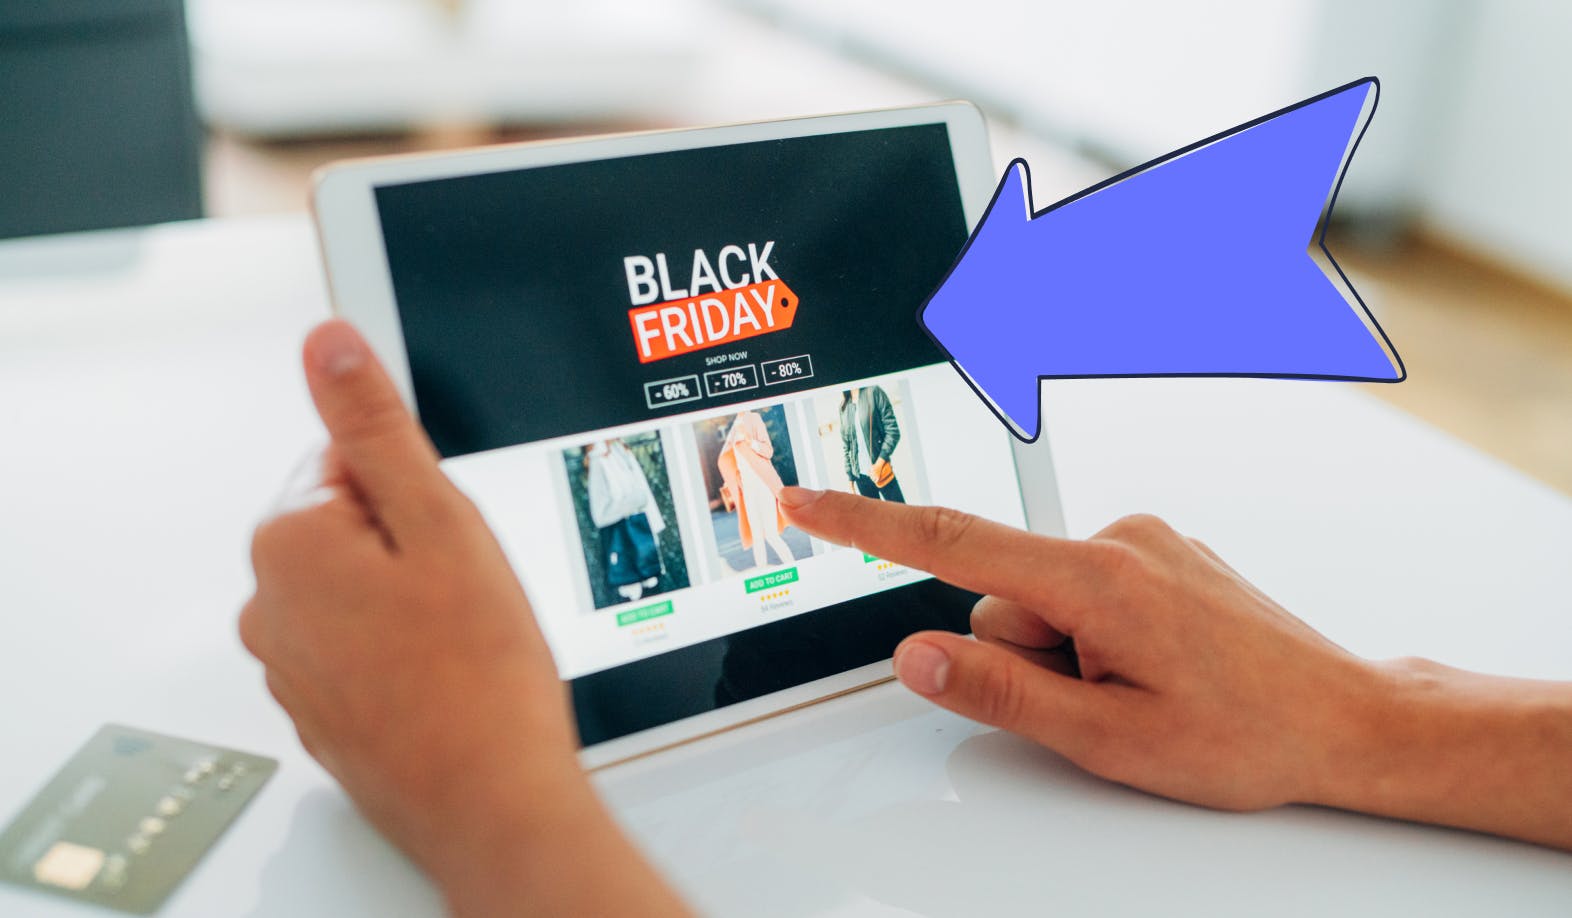 blogpost-image of an ipad displaying a Black Friday website with an illustrated arrow pointing to it